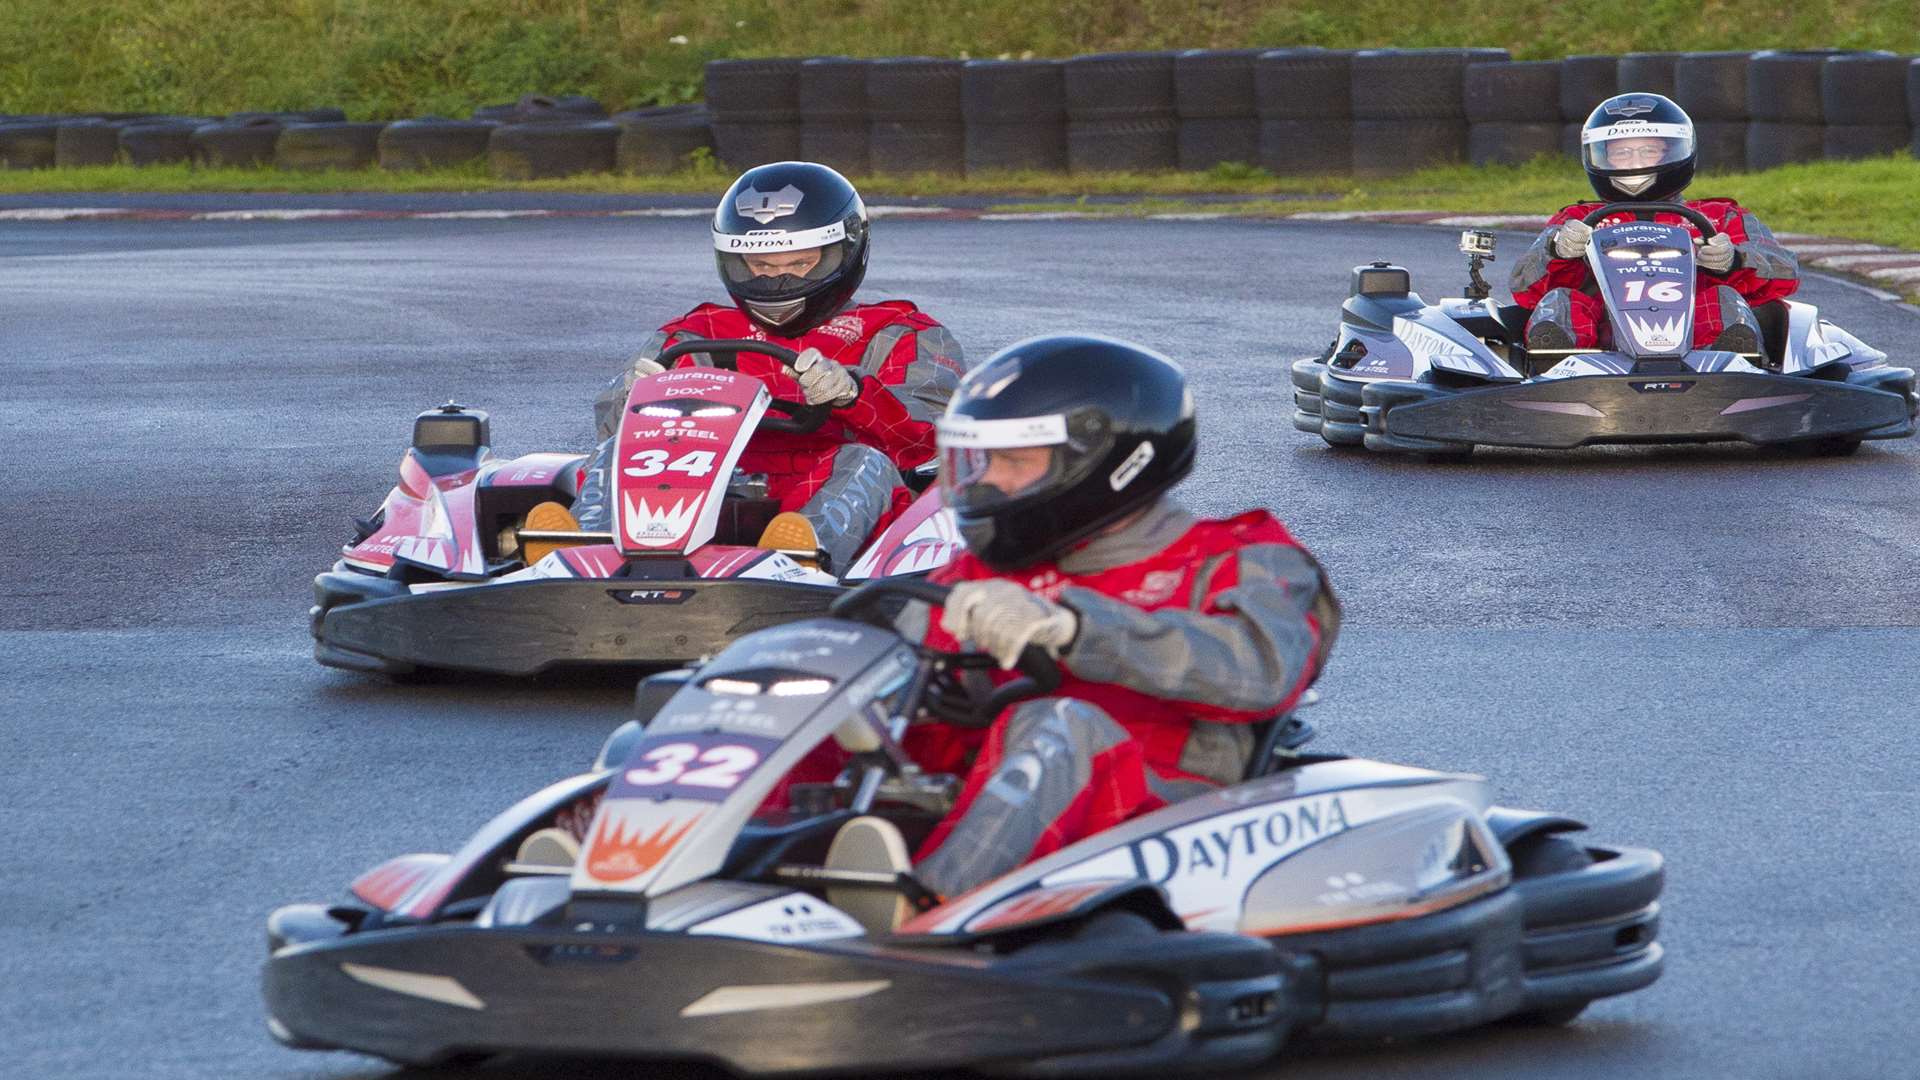 Both professional and amateur drivers took part in the race